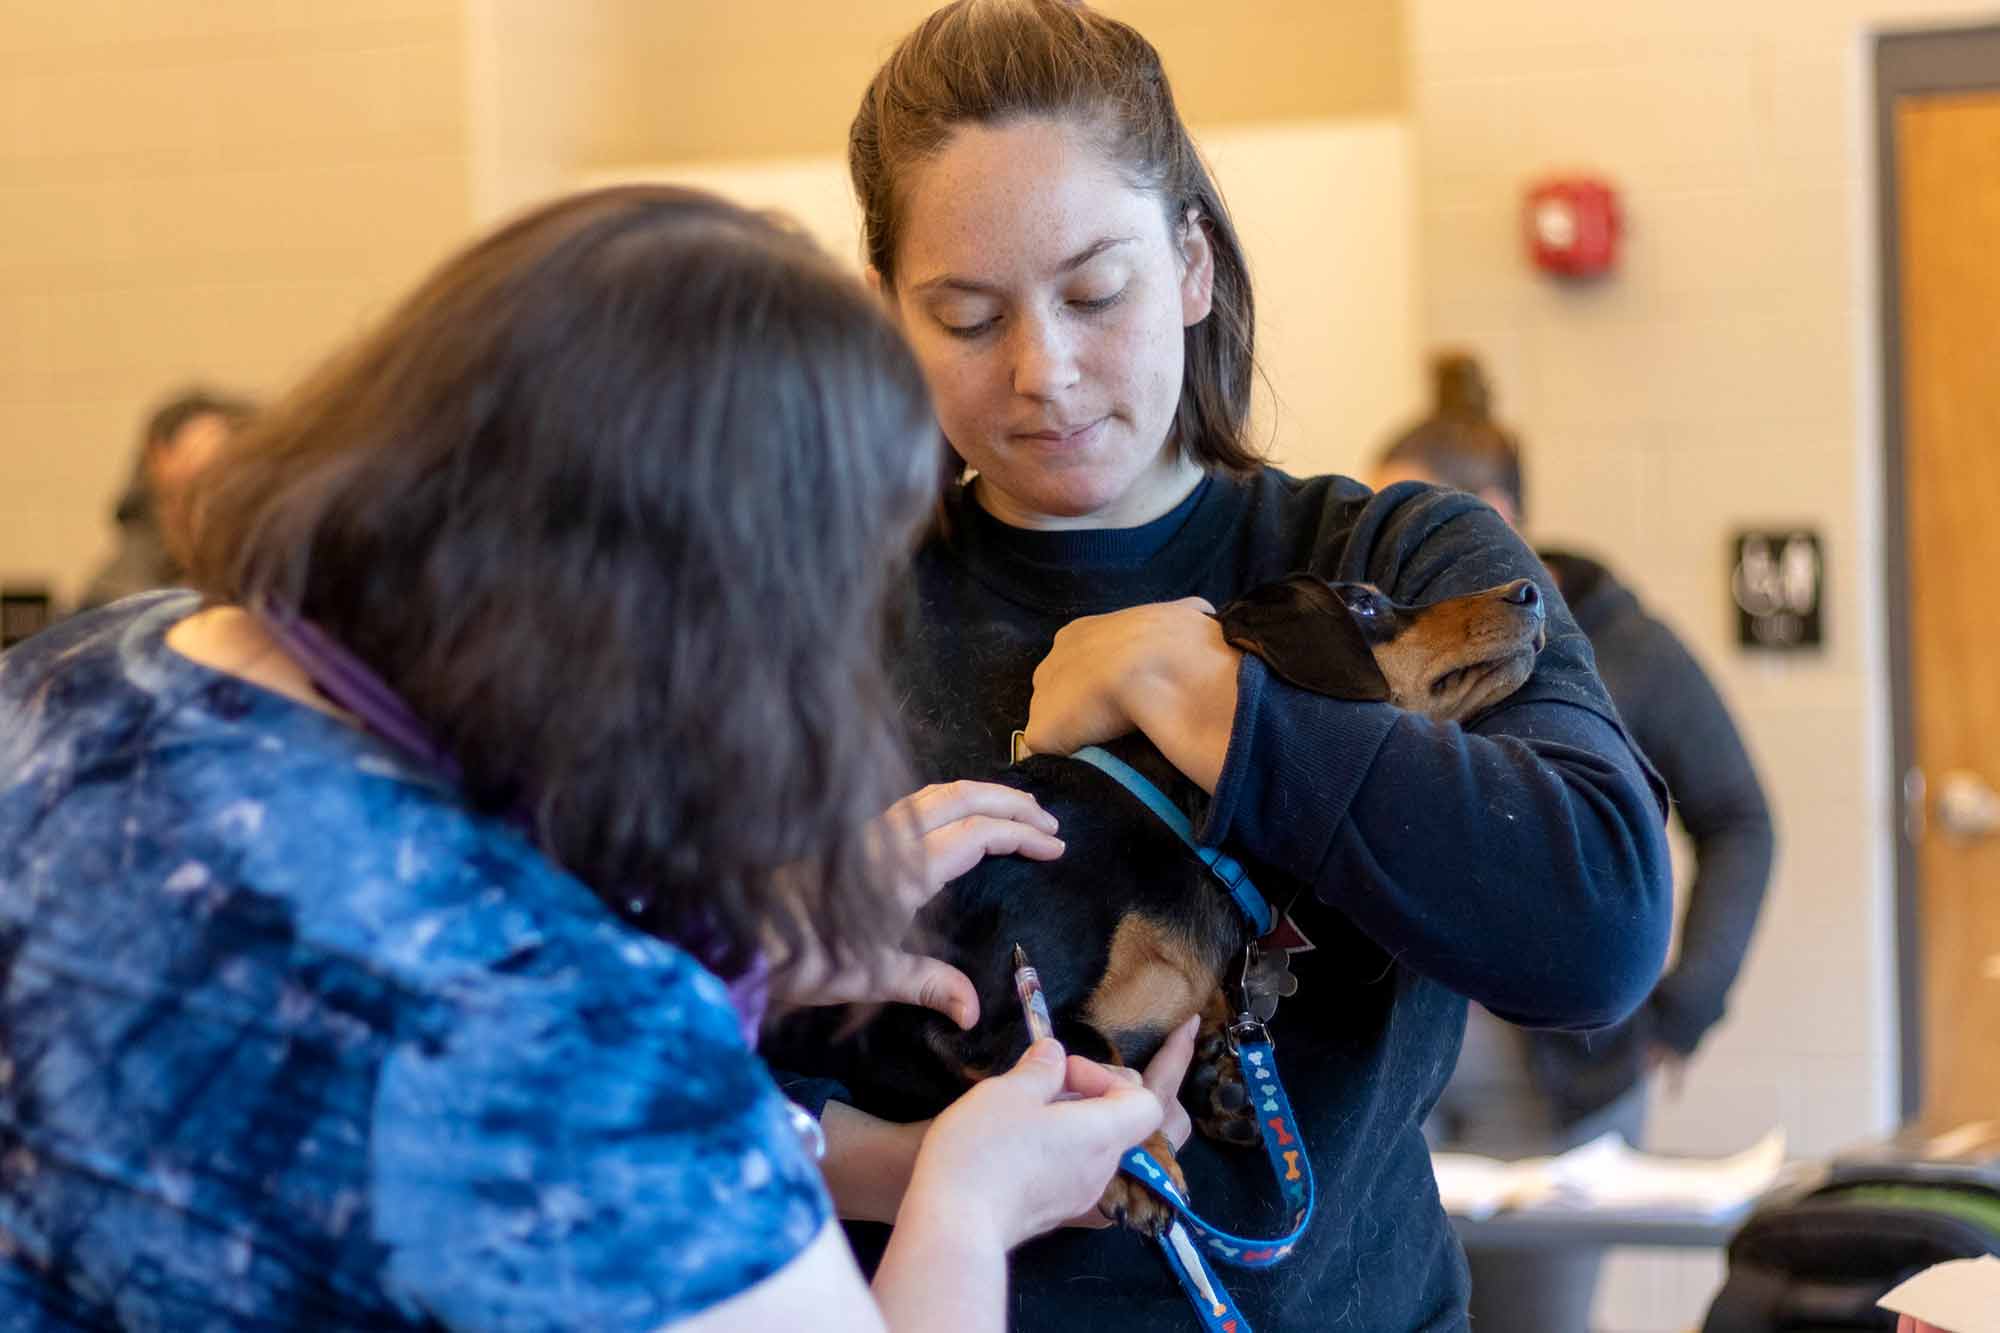 Gwinnett Animal Welfare and Enforcement offered free pet vaccinations and microchips to the first 500 animals at the Best Friend Pet and Safety Festival in 2019. Gwinnett Animal Welfare and Enforcement typically hosts and participates in local events, providing services and resources in an effort to increase community education and outreach and maintain a healthy pet population.